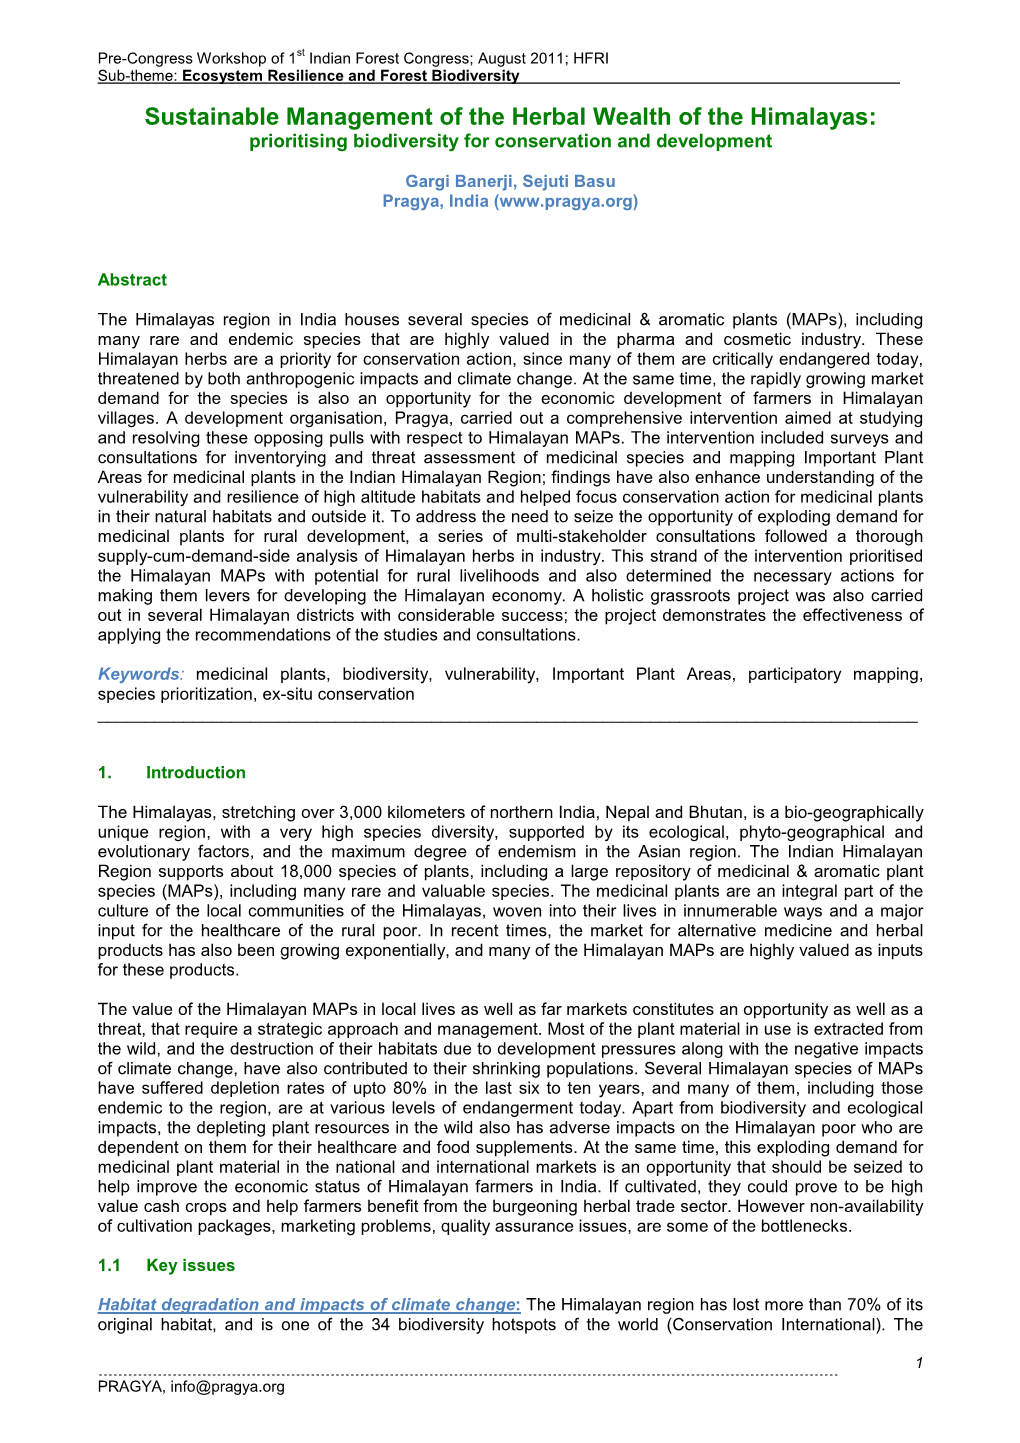 Sustainable Management of the Herbal Wealth of the Himalayas: Prioritising Biodiversity for Conservation and Development